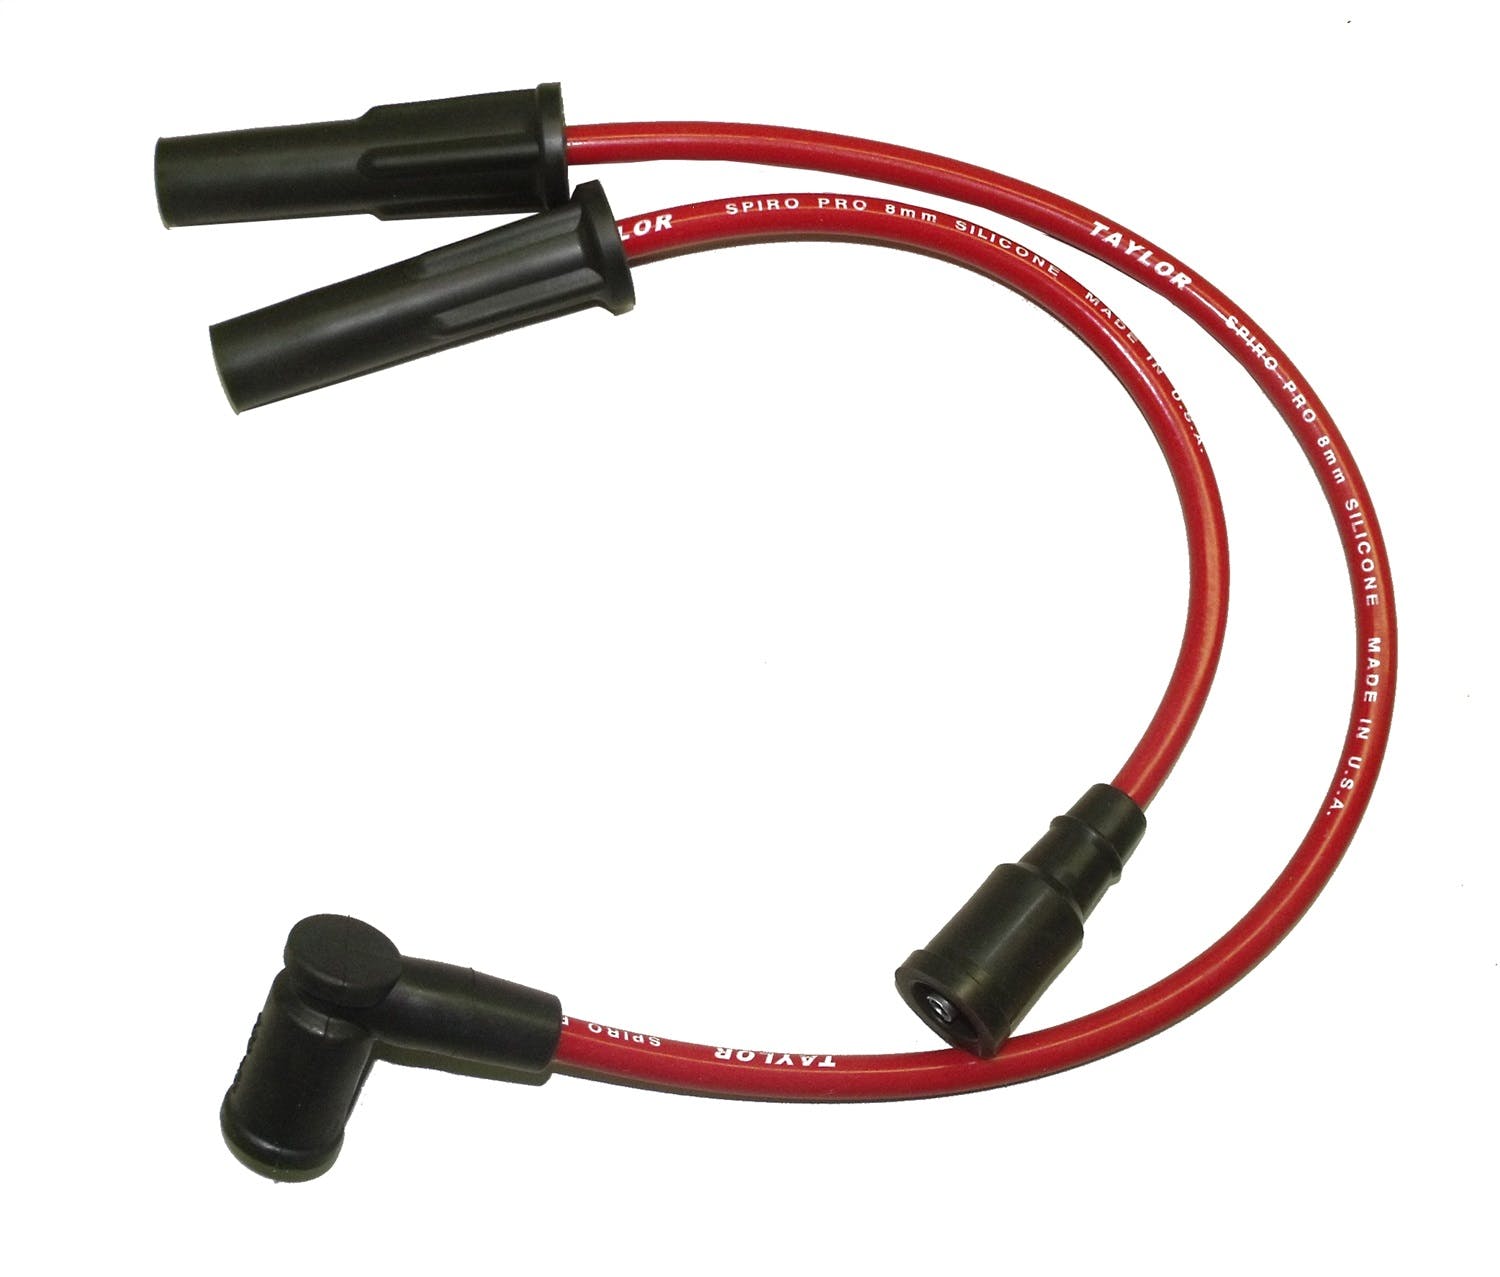 Taylor Cable Products 10263 8mm Spiro Pro red MC